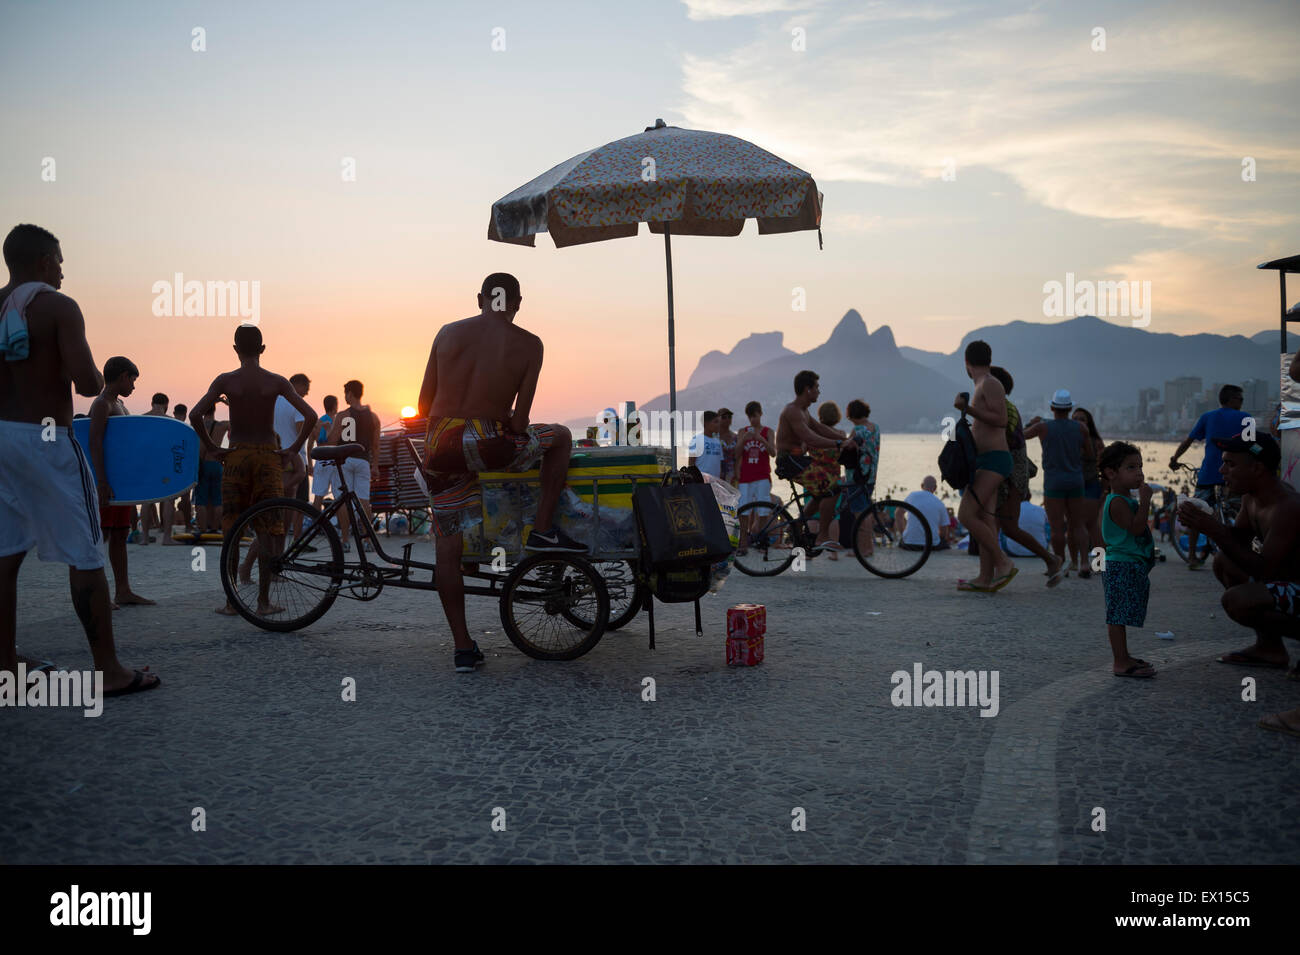 RIO DE JANEIRO, BRAZIL - FEBRUARY 21, 2015: Vendors and tourists gather at Arpoador for the daily sunset watching ritual. Stock Photo